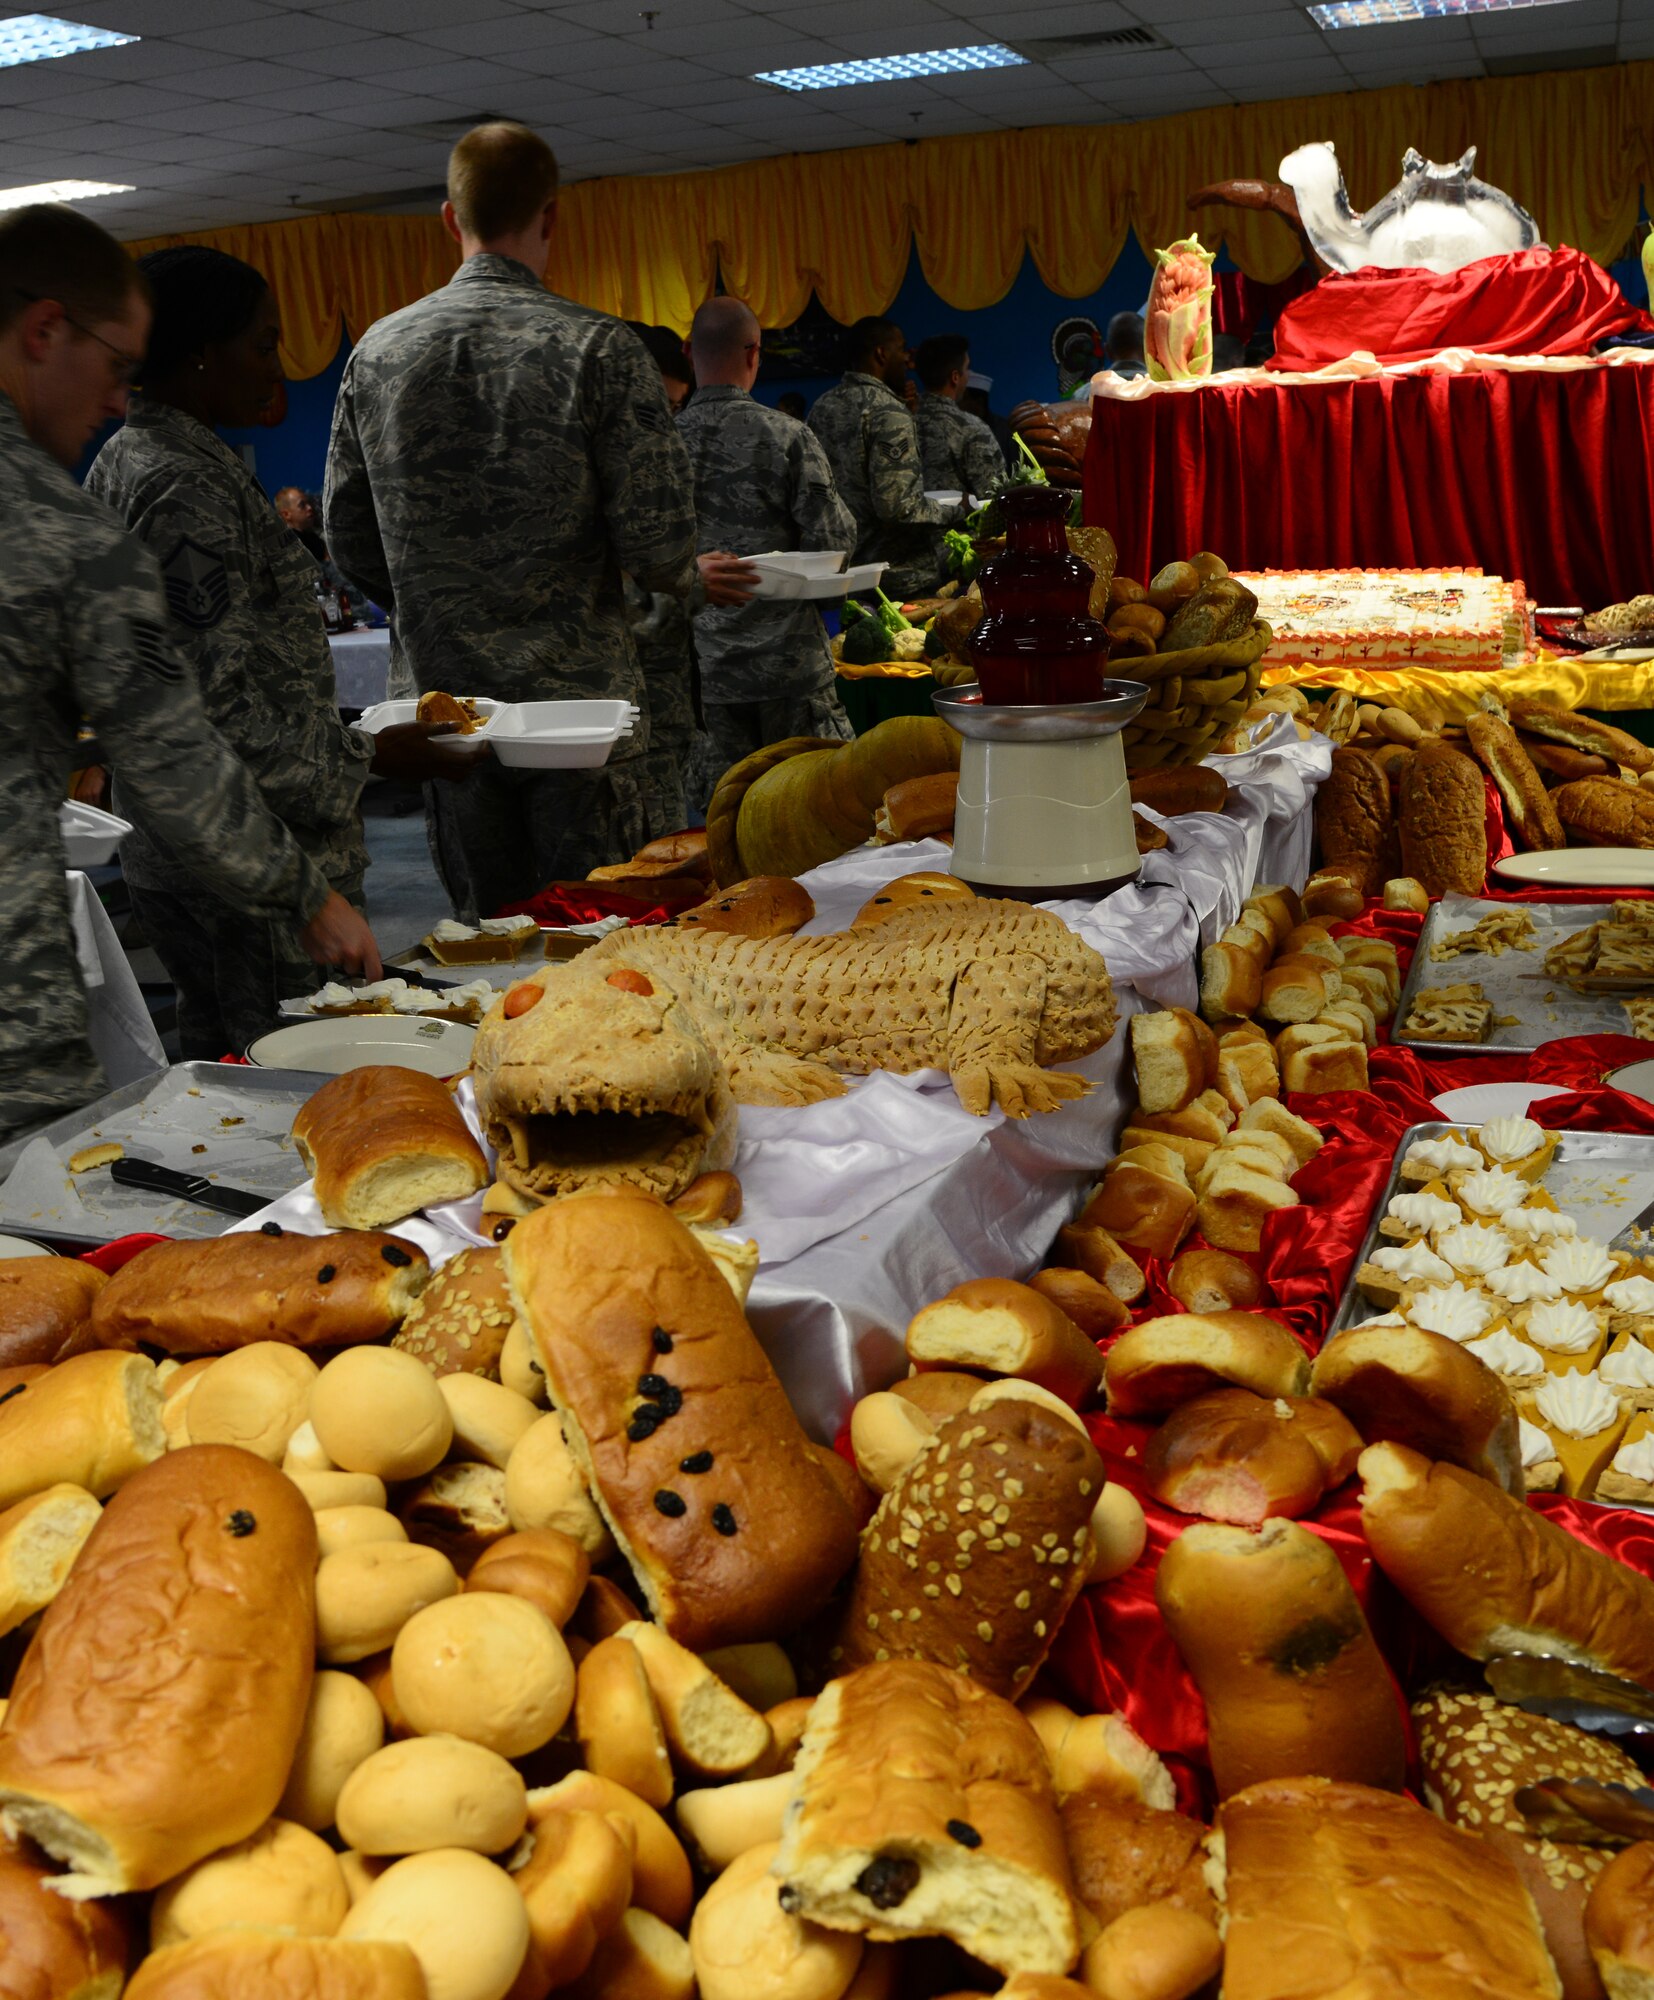 Desserts and breads line a table during the annual Thanksgiving meal Nov. 27, 2014, at Al Udeid Air Base, Qatar. The base dining facility staff prepared Thanksgiving meals more than 9,000 servicemembers. (U.S. Air Force photo by Senior Airman Kia Atkins)